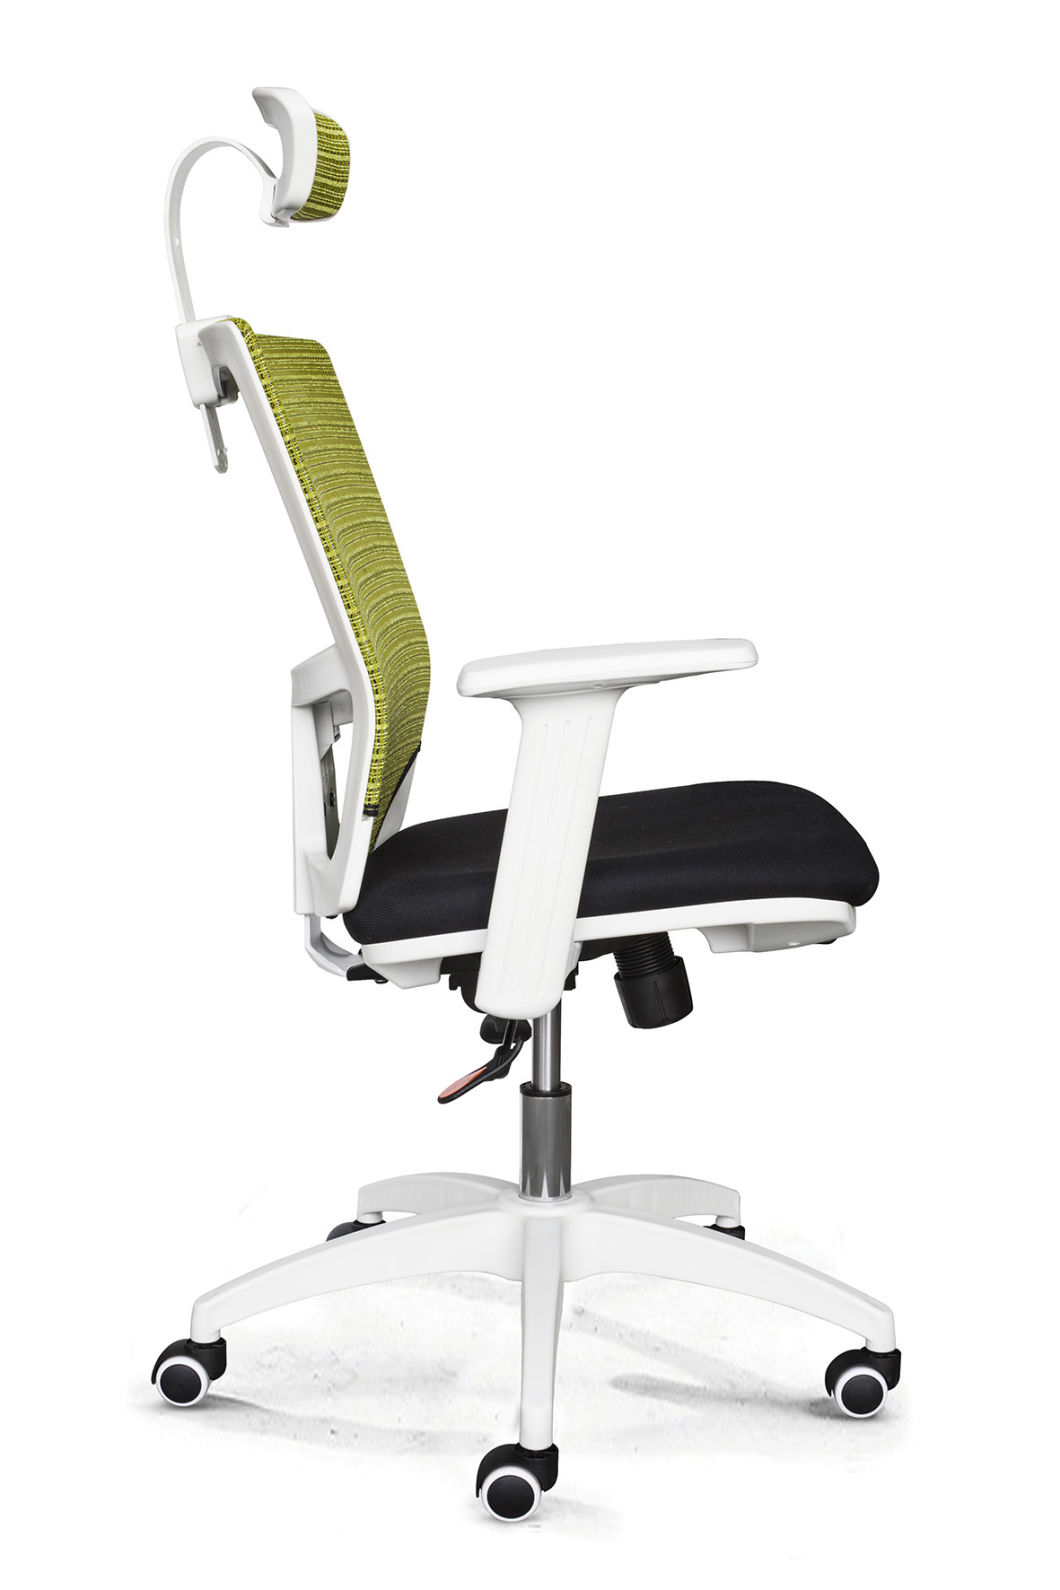 High Quality Executive Office Chair